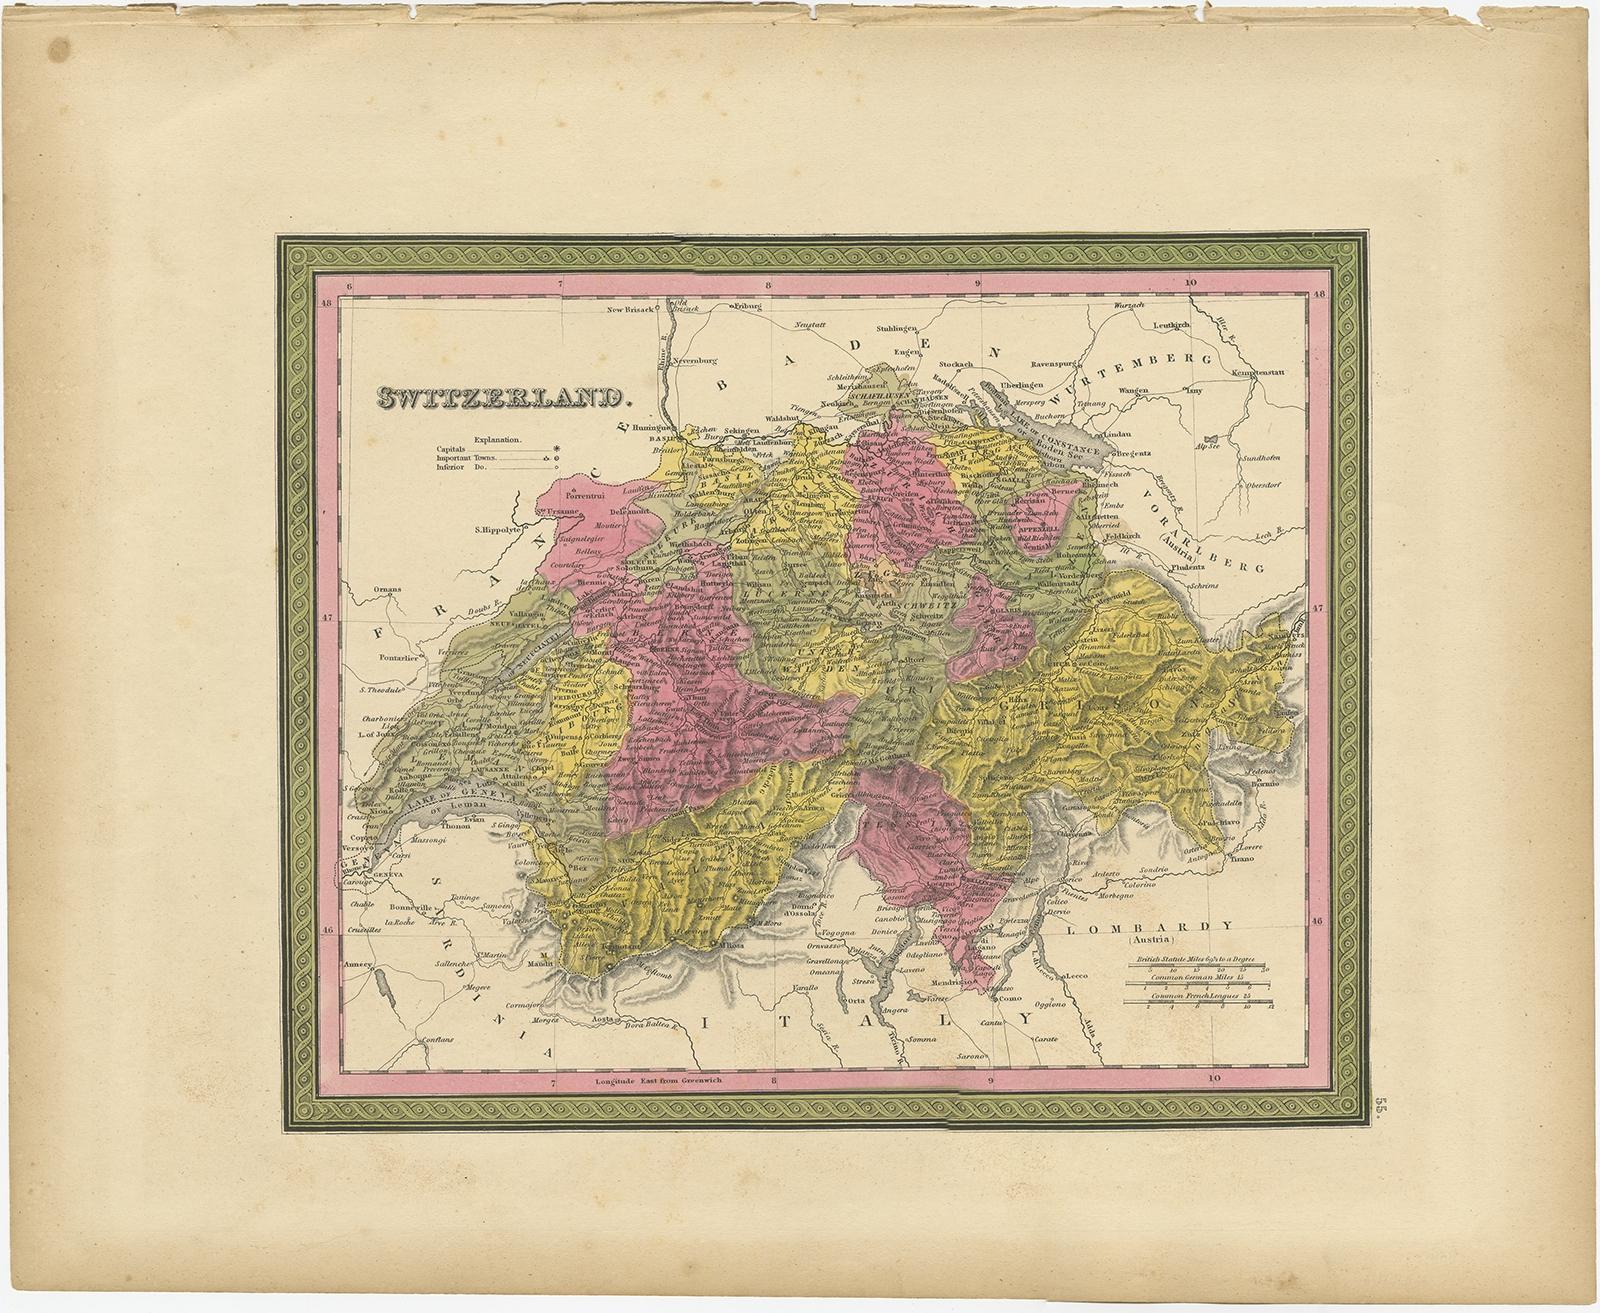 Antique map titled 'Switzerland'. Old map of Switzerland. 

This map originates from 'A New Universal Atlas Containing Maps of the various Empires, Kingdoms, States and Republics Of The World (..) by S.A. Mitchell. 

Artists and Engravers: